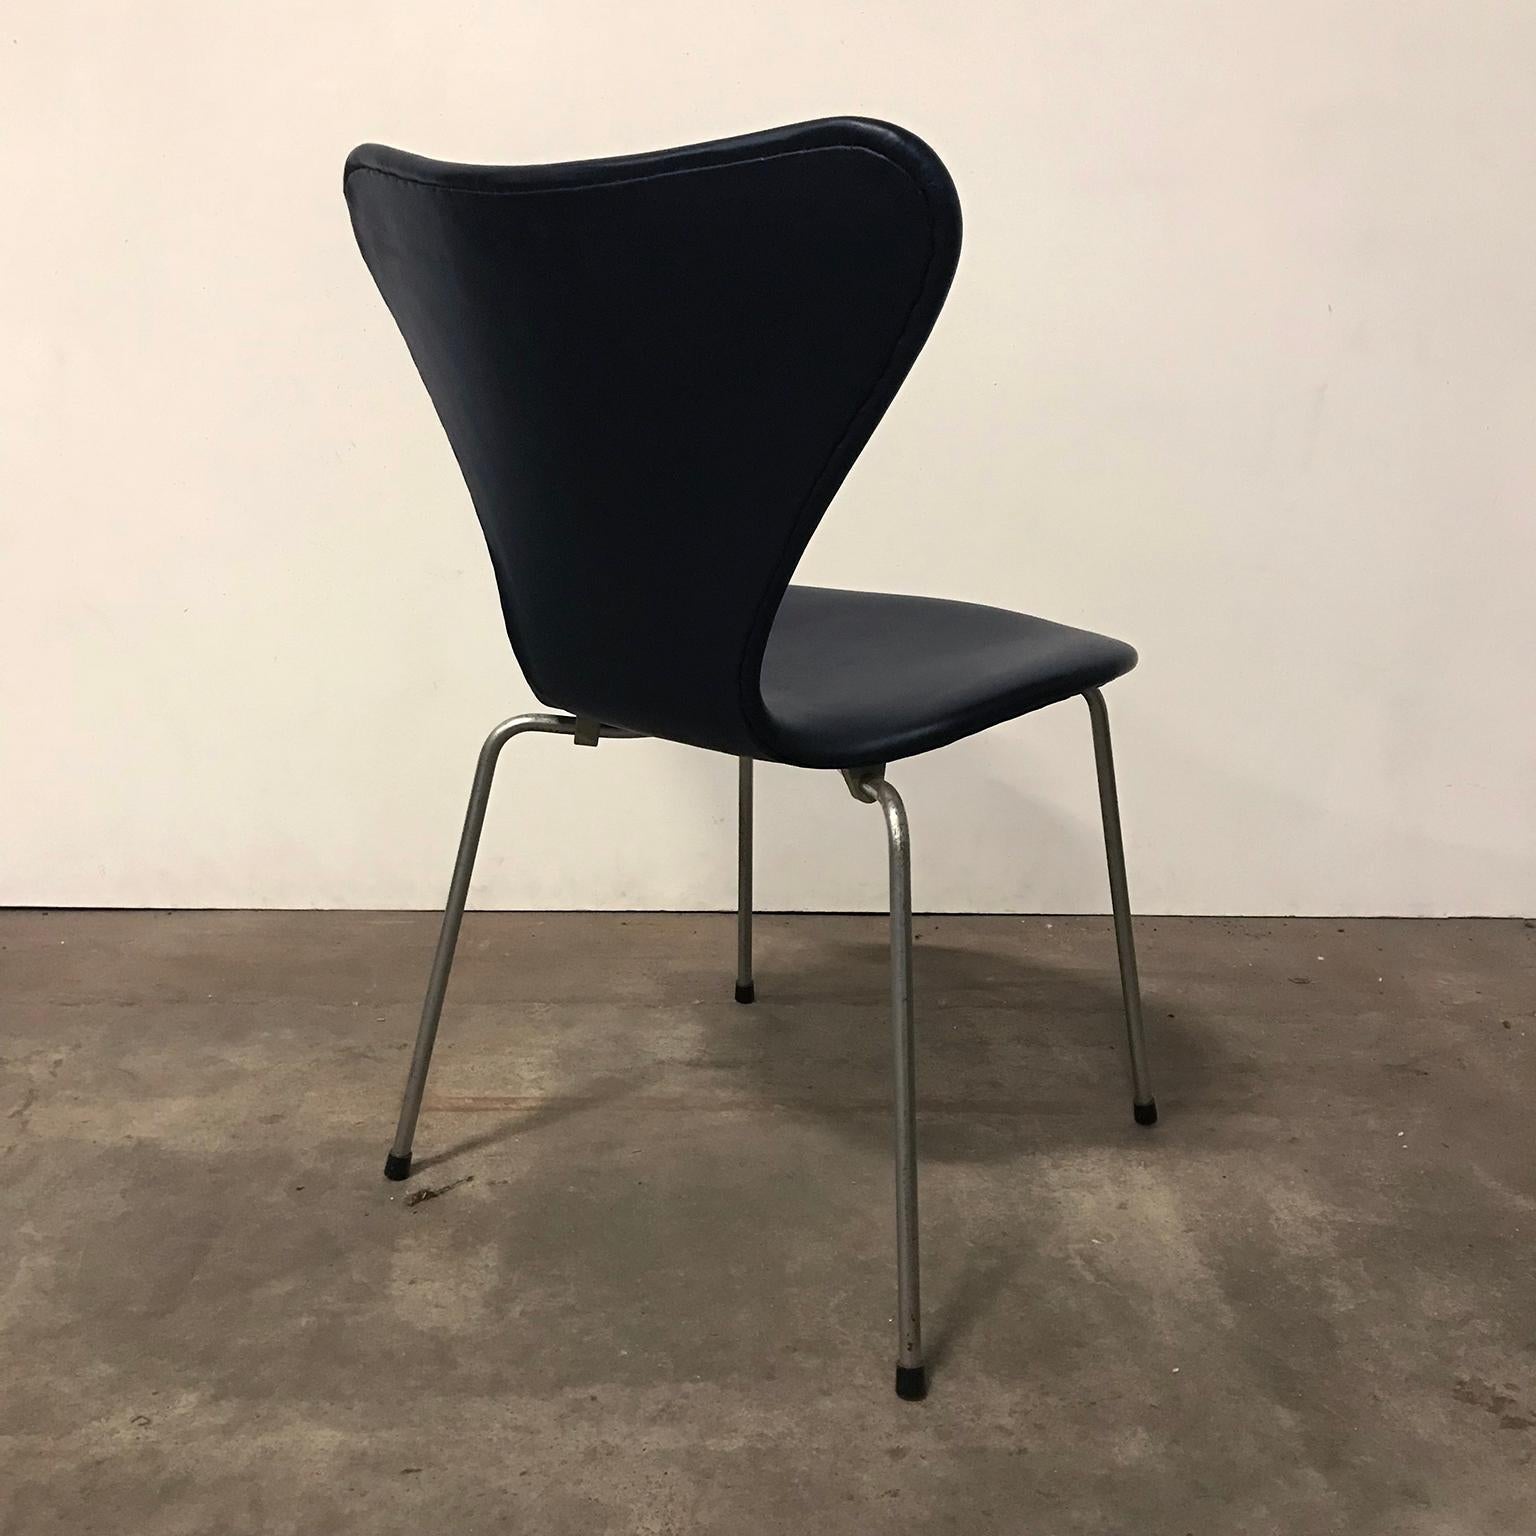 Danish 1955, Arne Jacobsen, Early Vintage Black Faux Leather 3107 Butterfly Chair For Sale